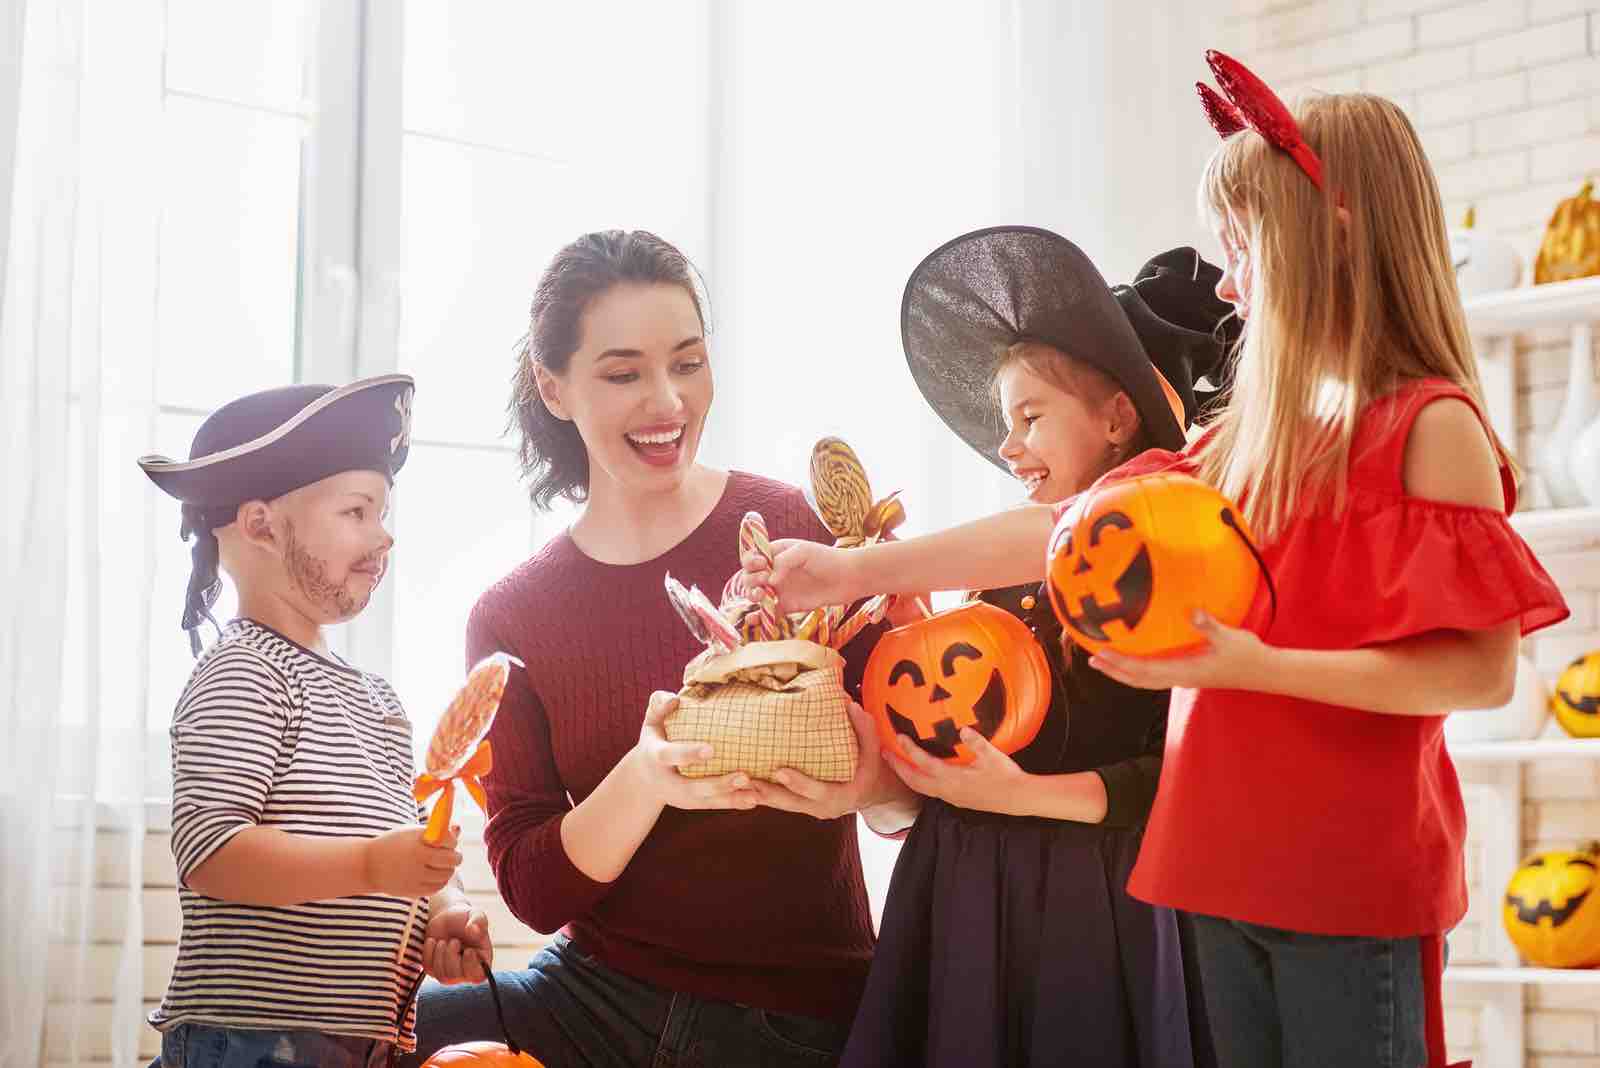 You Must Have Some Einstein Genes If You Can Solve 16/20 of These Challenging Math Word Problems Happy family celebrating Halloween! Young mom treats children with candy. Funny kids in carnival cos